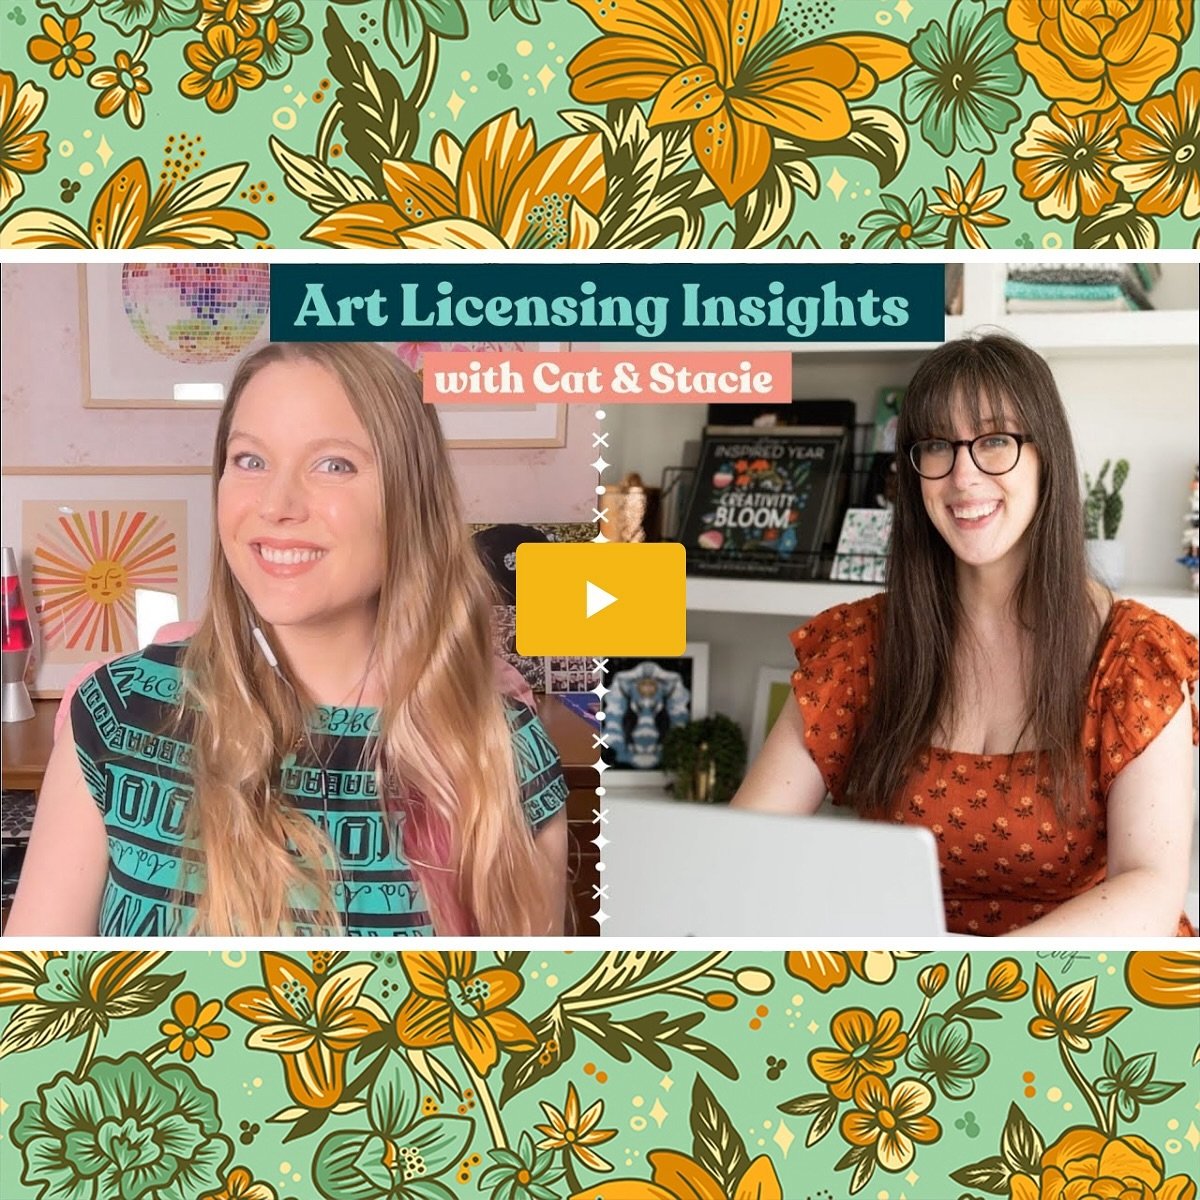 I sat down with my friend Stacie Bloomfield for an in-depth, hour-long call to chat about our industry aaaaaand we recorded the entire thing for my Youtube channel! (Comment WATCH and I&rsquo;ll send the link to your DMs. You can also tap the link in